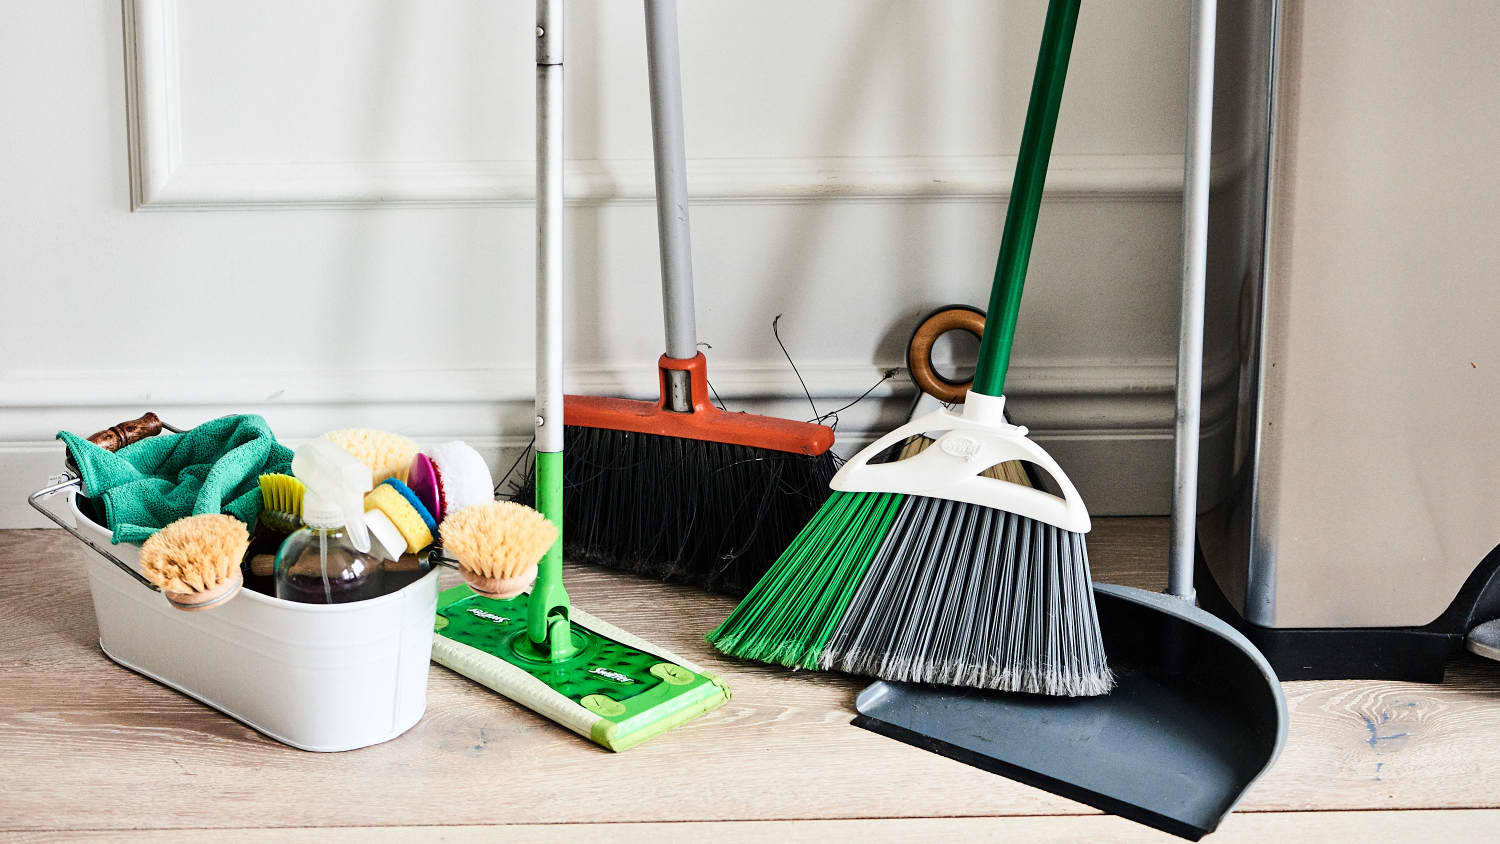 Residential Cleaning Supplies